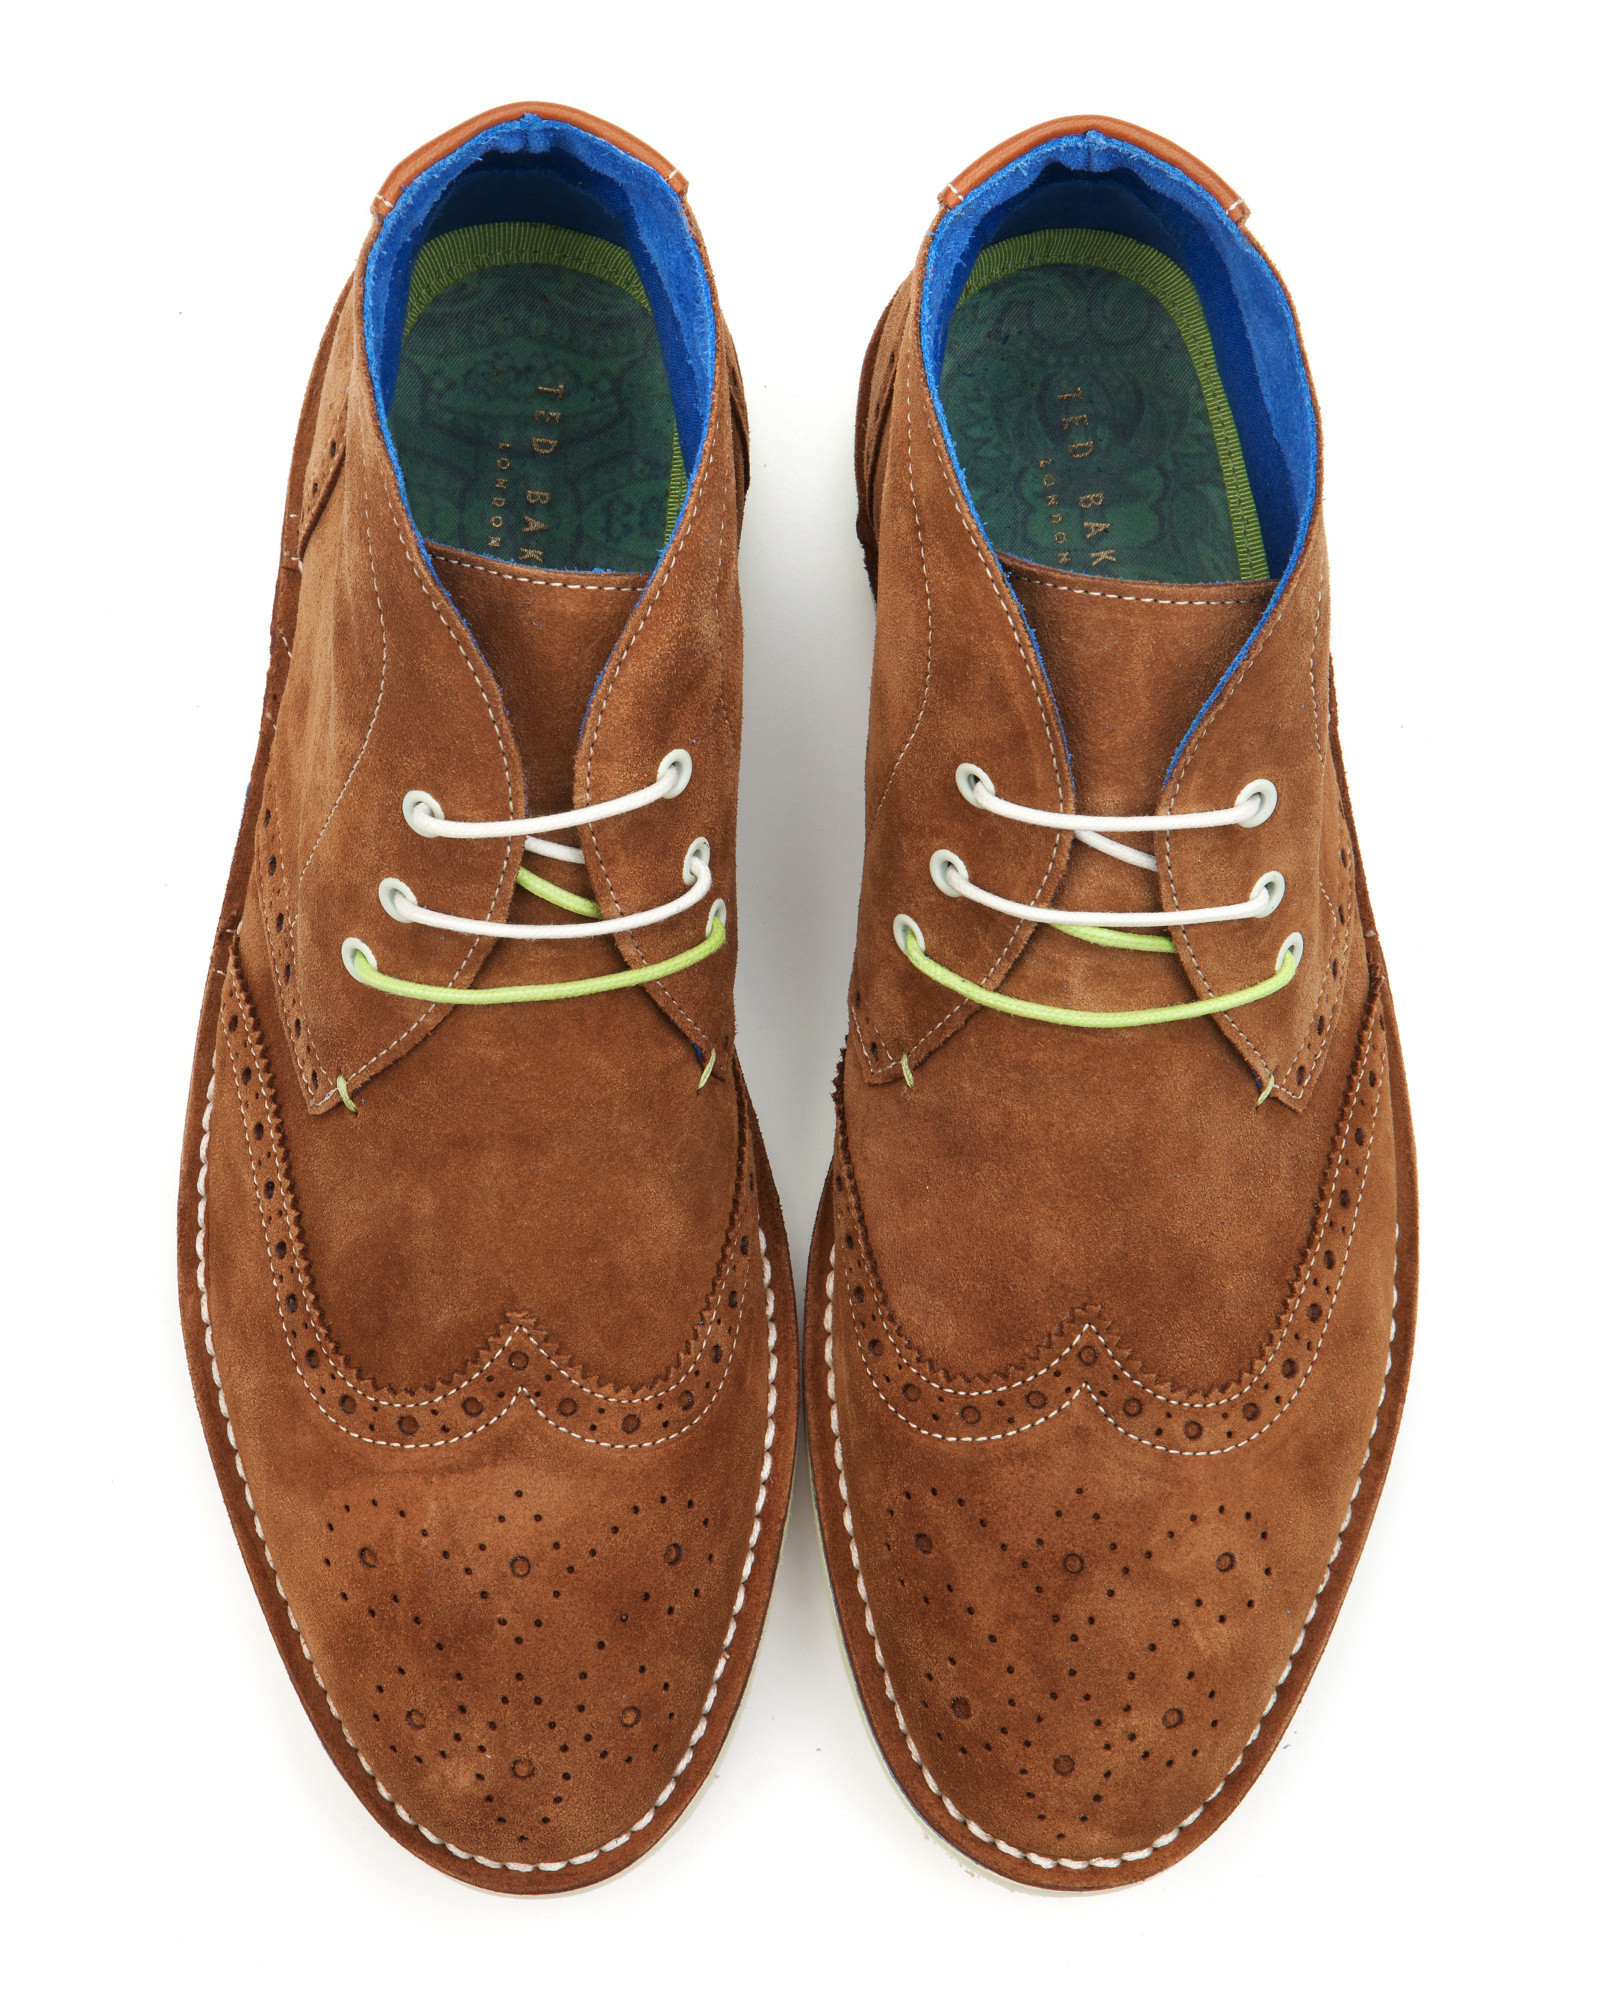 Ted Baker Suede Derby Brogue Shoe in Brown for Men - Lyst